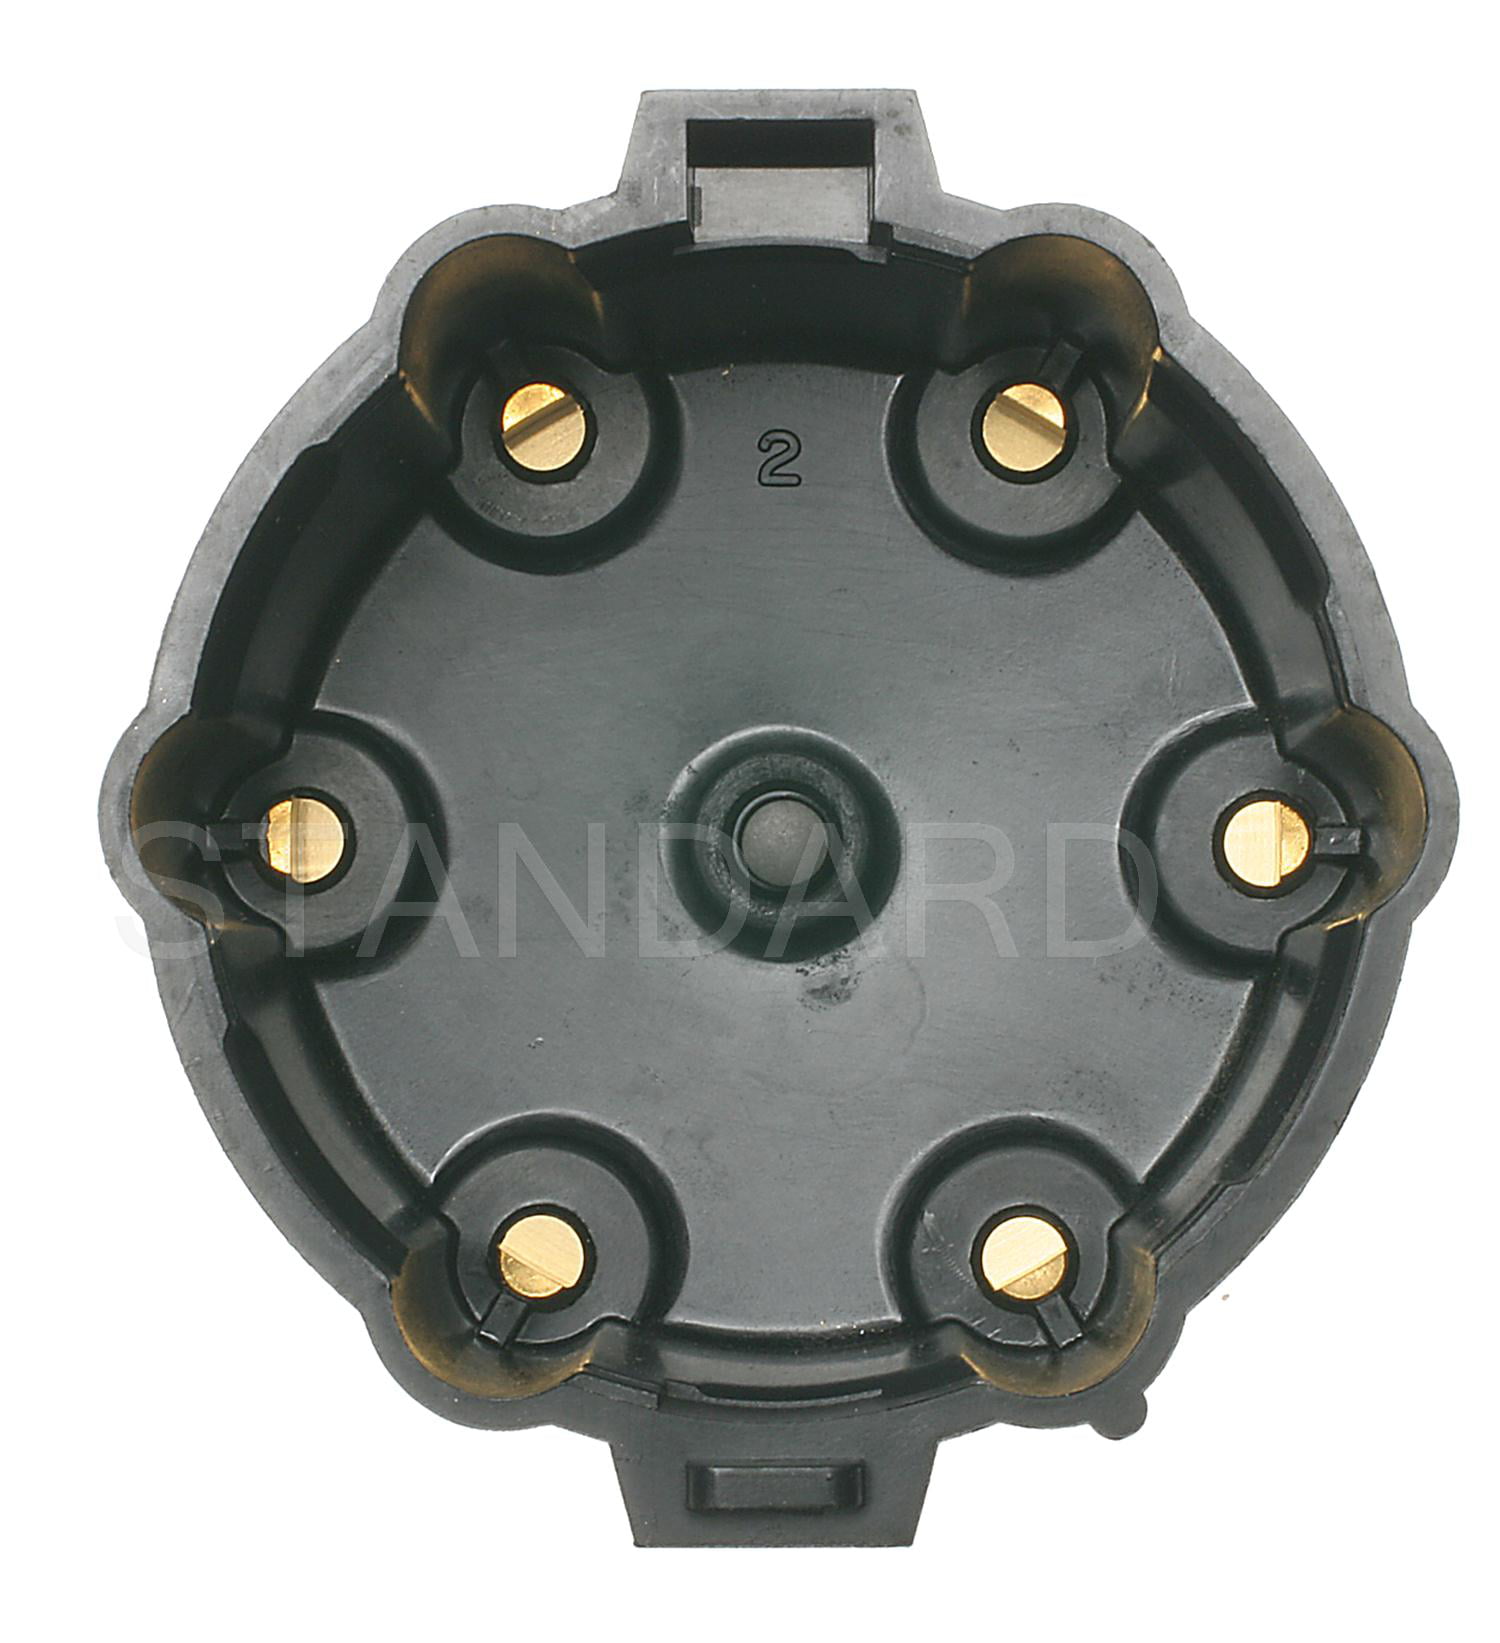 Standard Motor Products JH74 Ignition Cap 